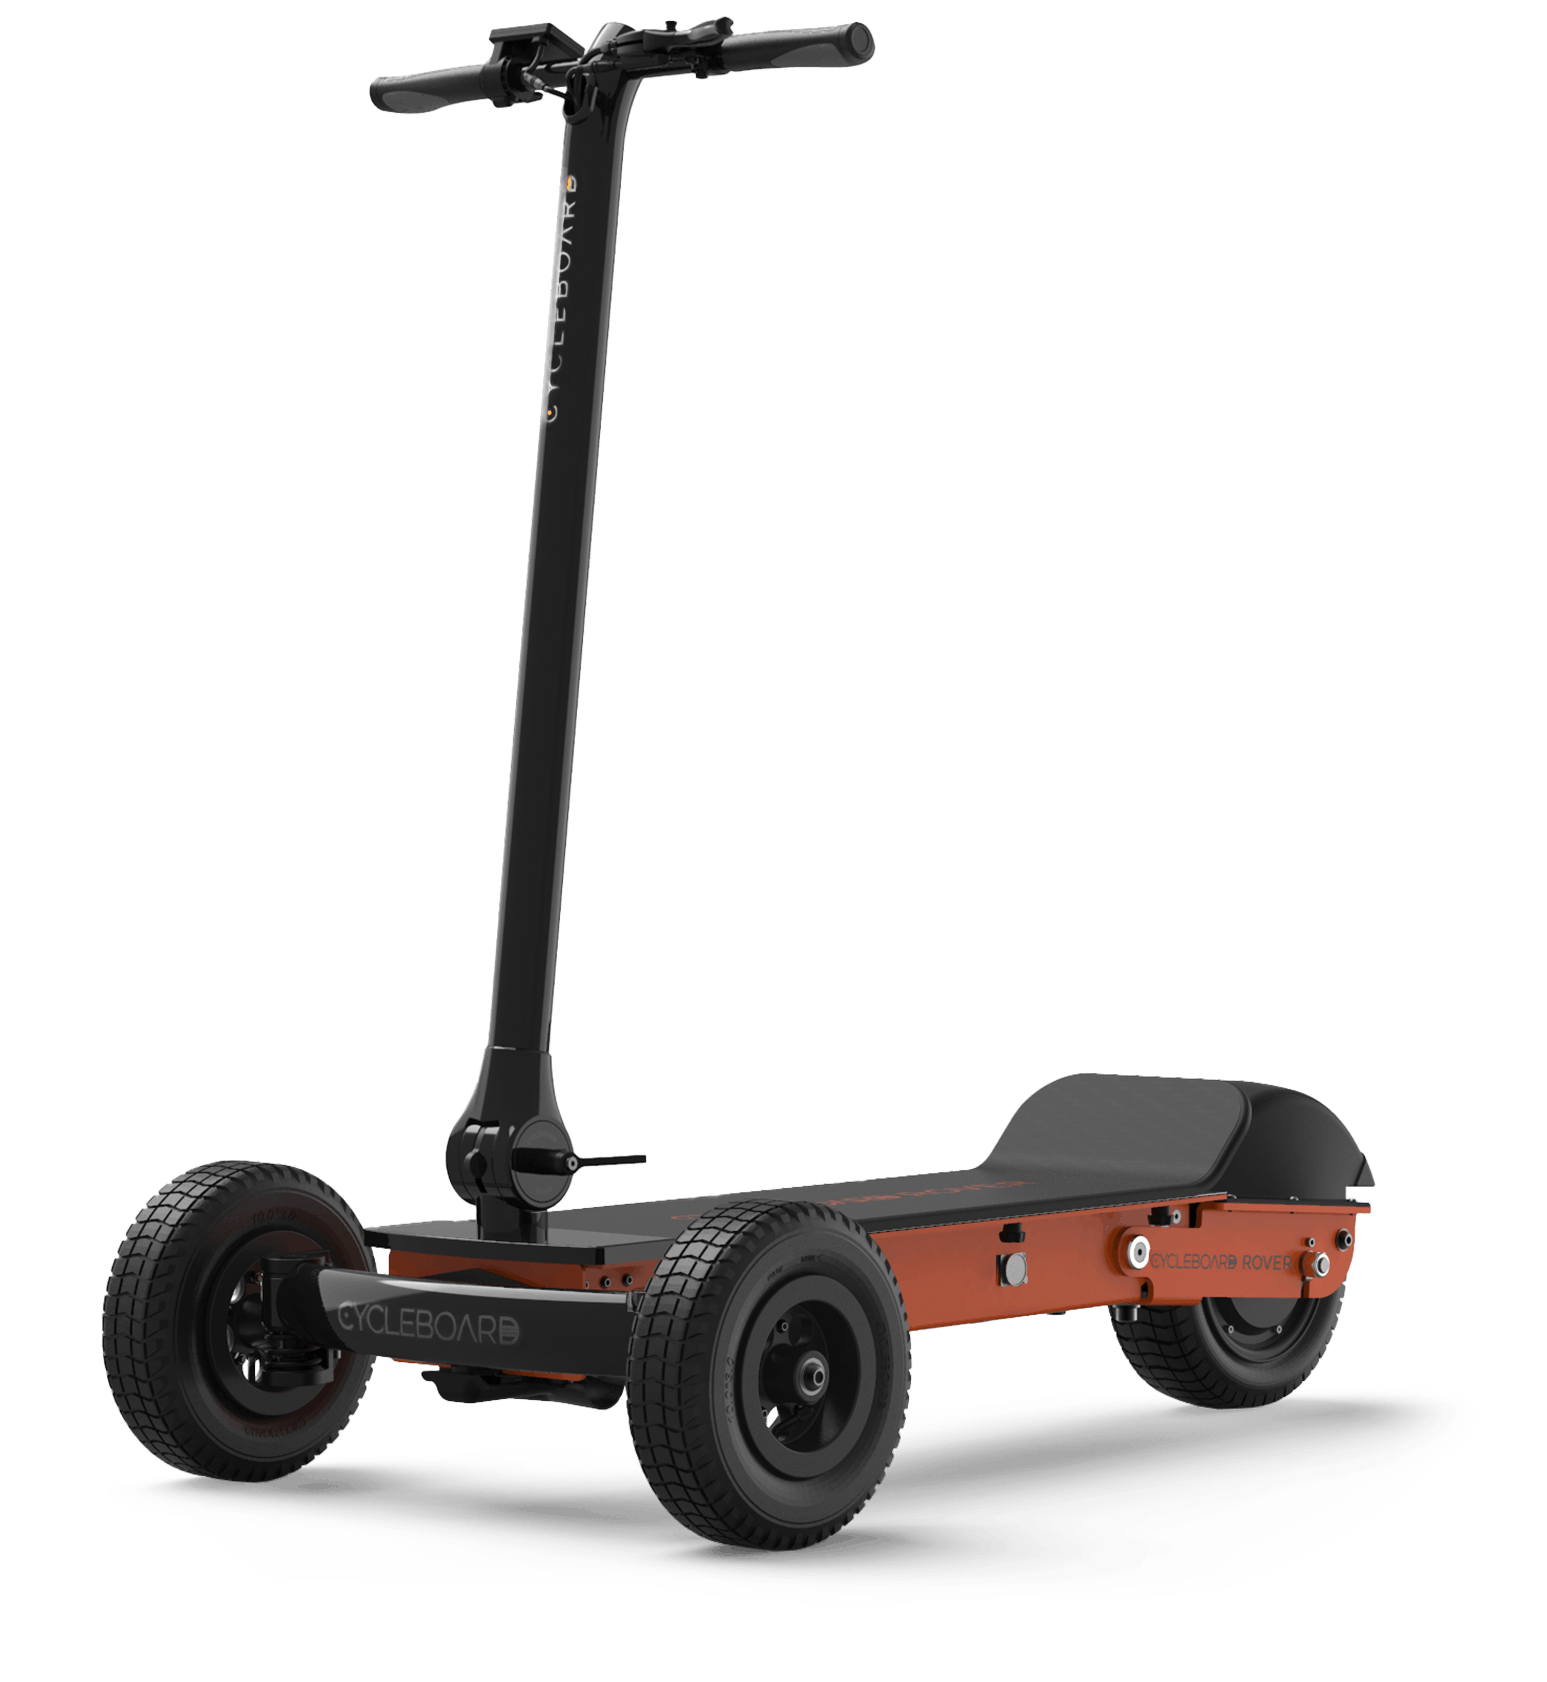 The Segway Max G2 Surprises with More than Just Suspension - Rider Guide